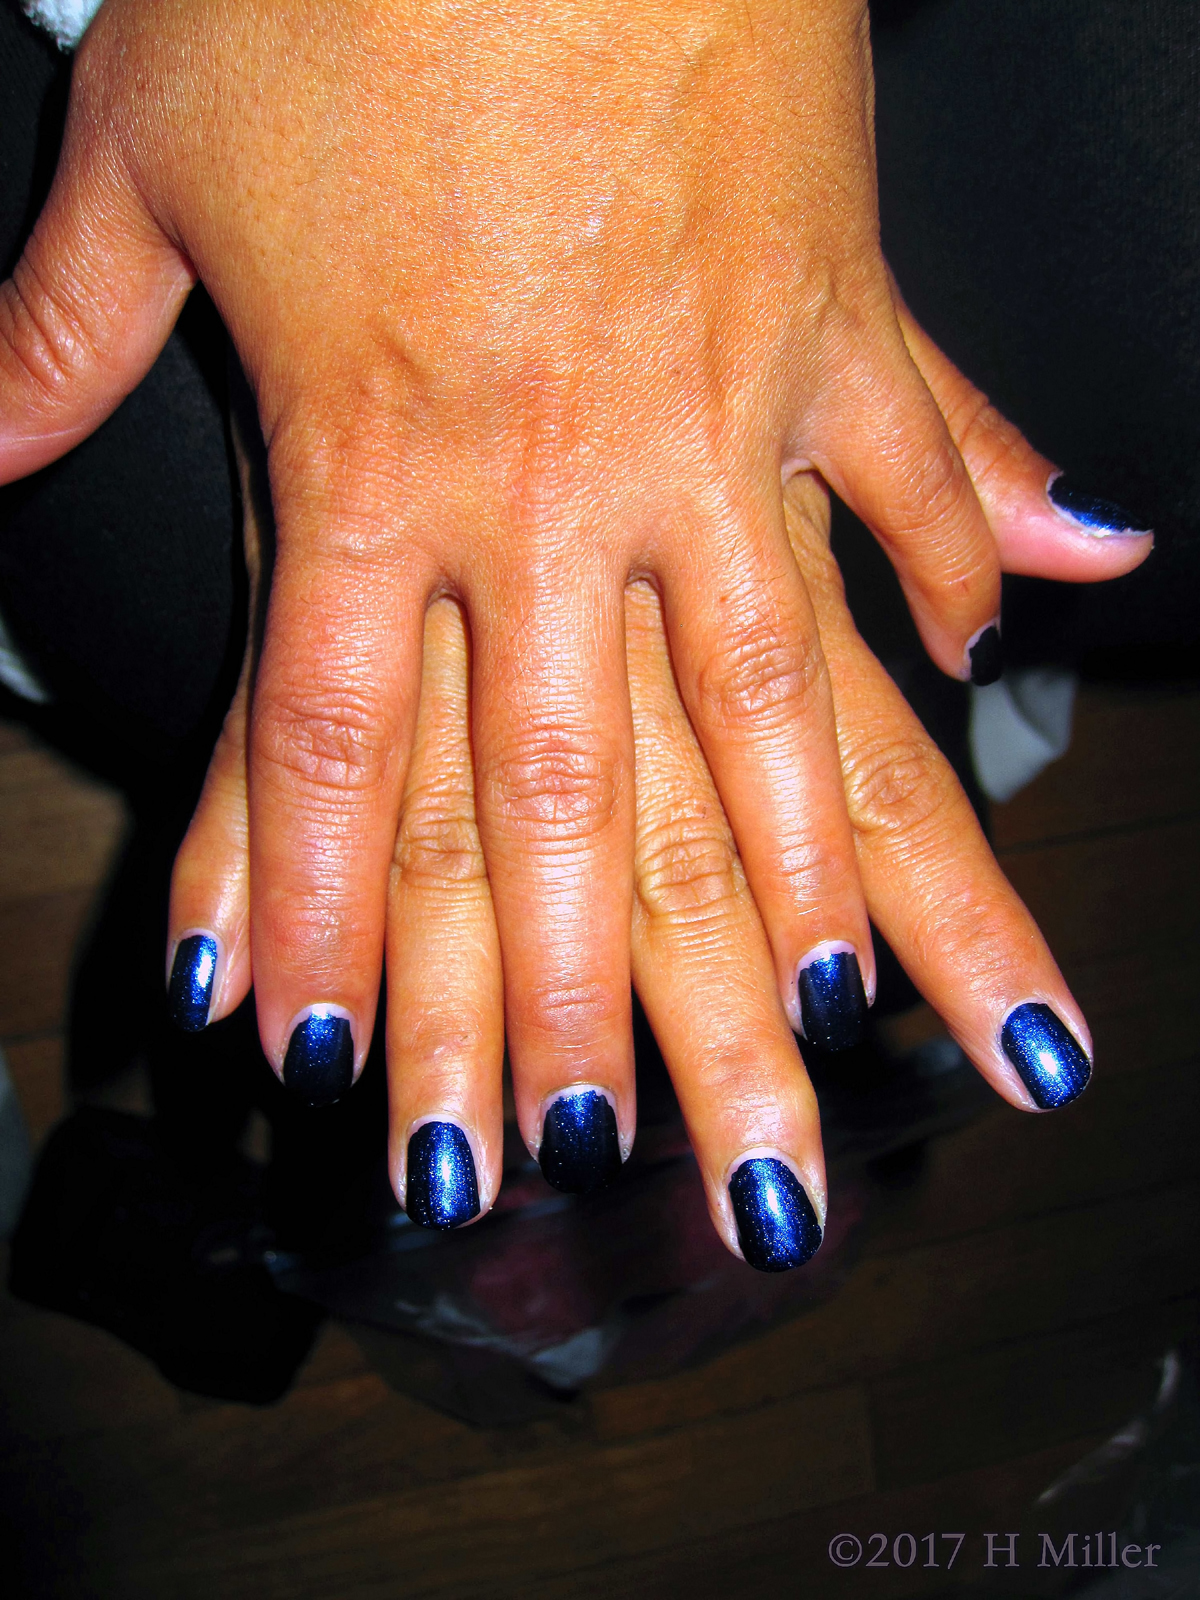 This Blue Girls Manicure Is Super Pretty!